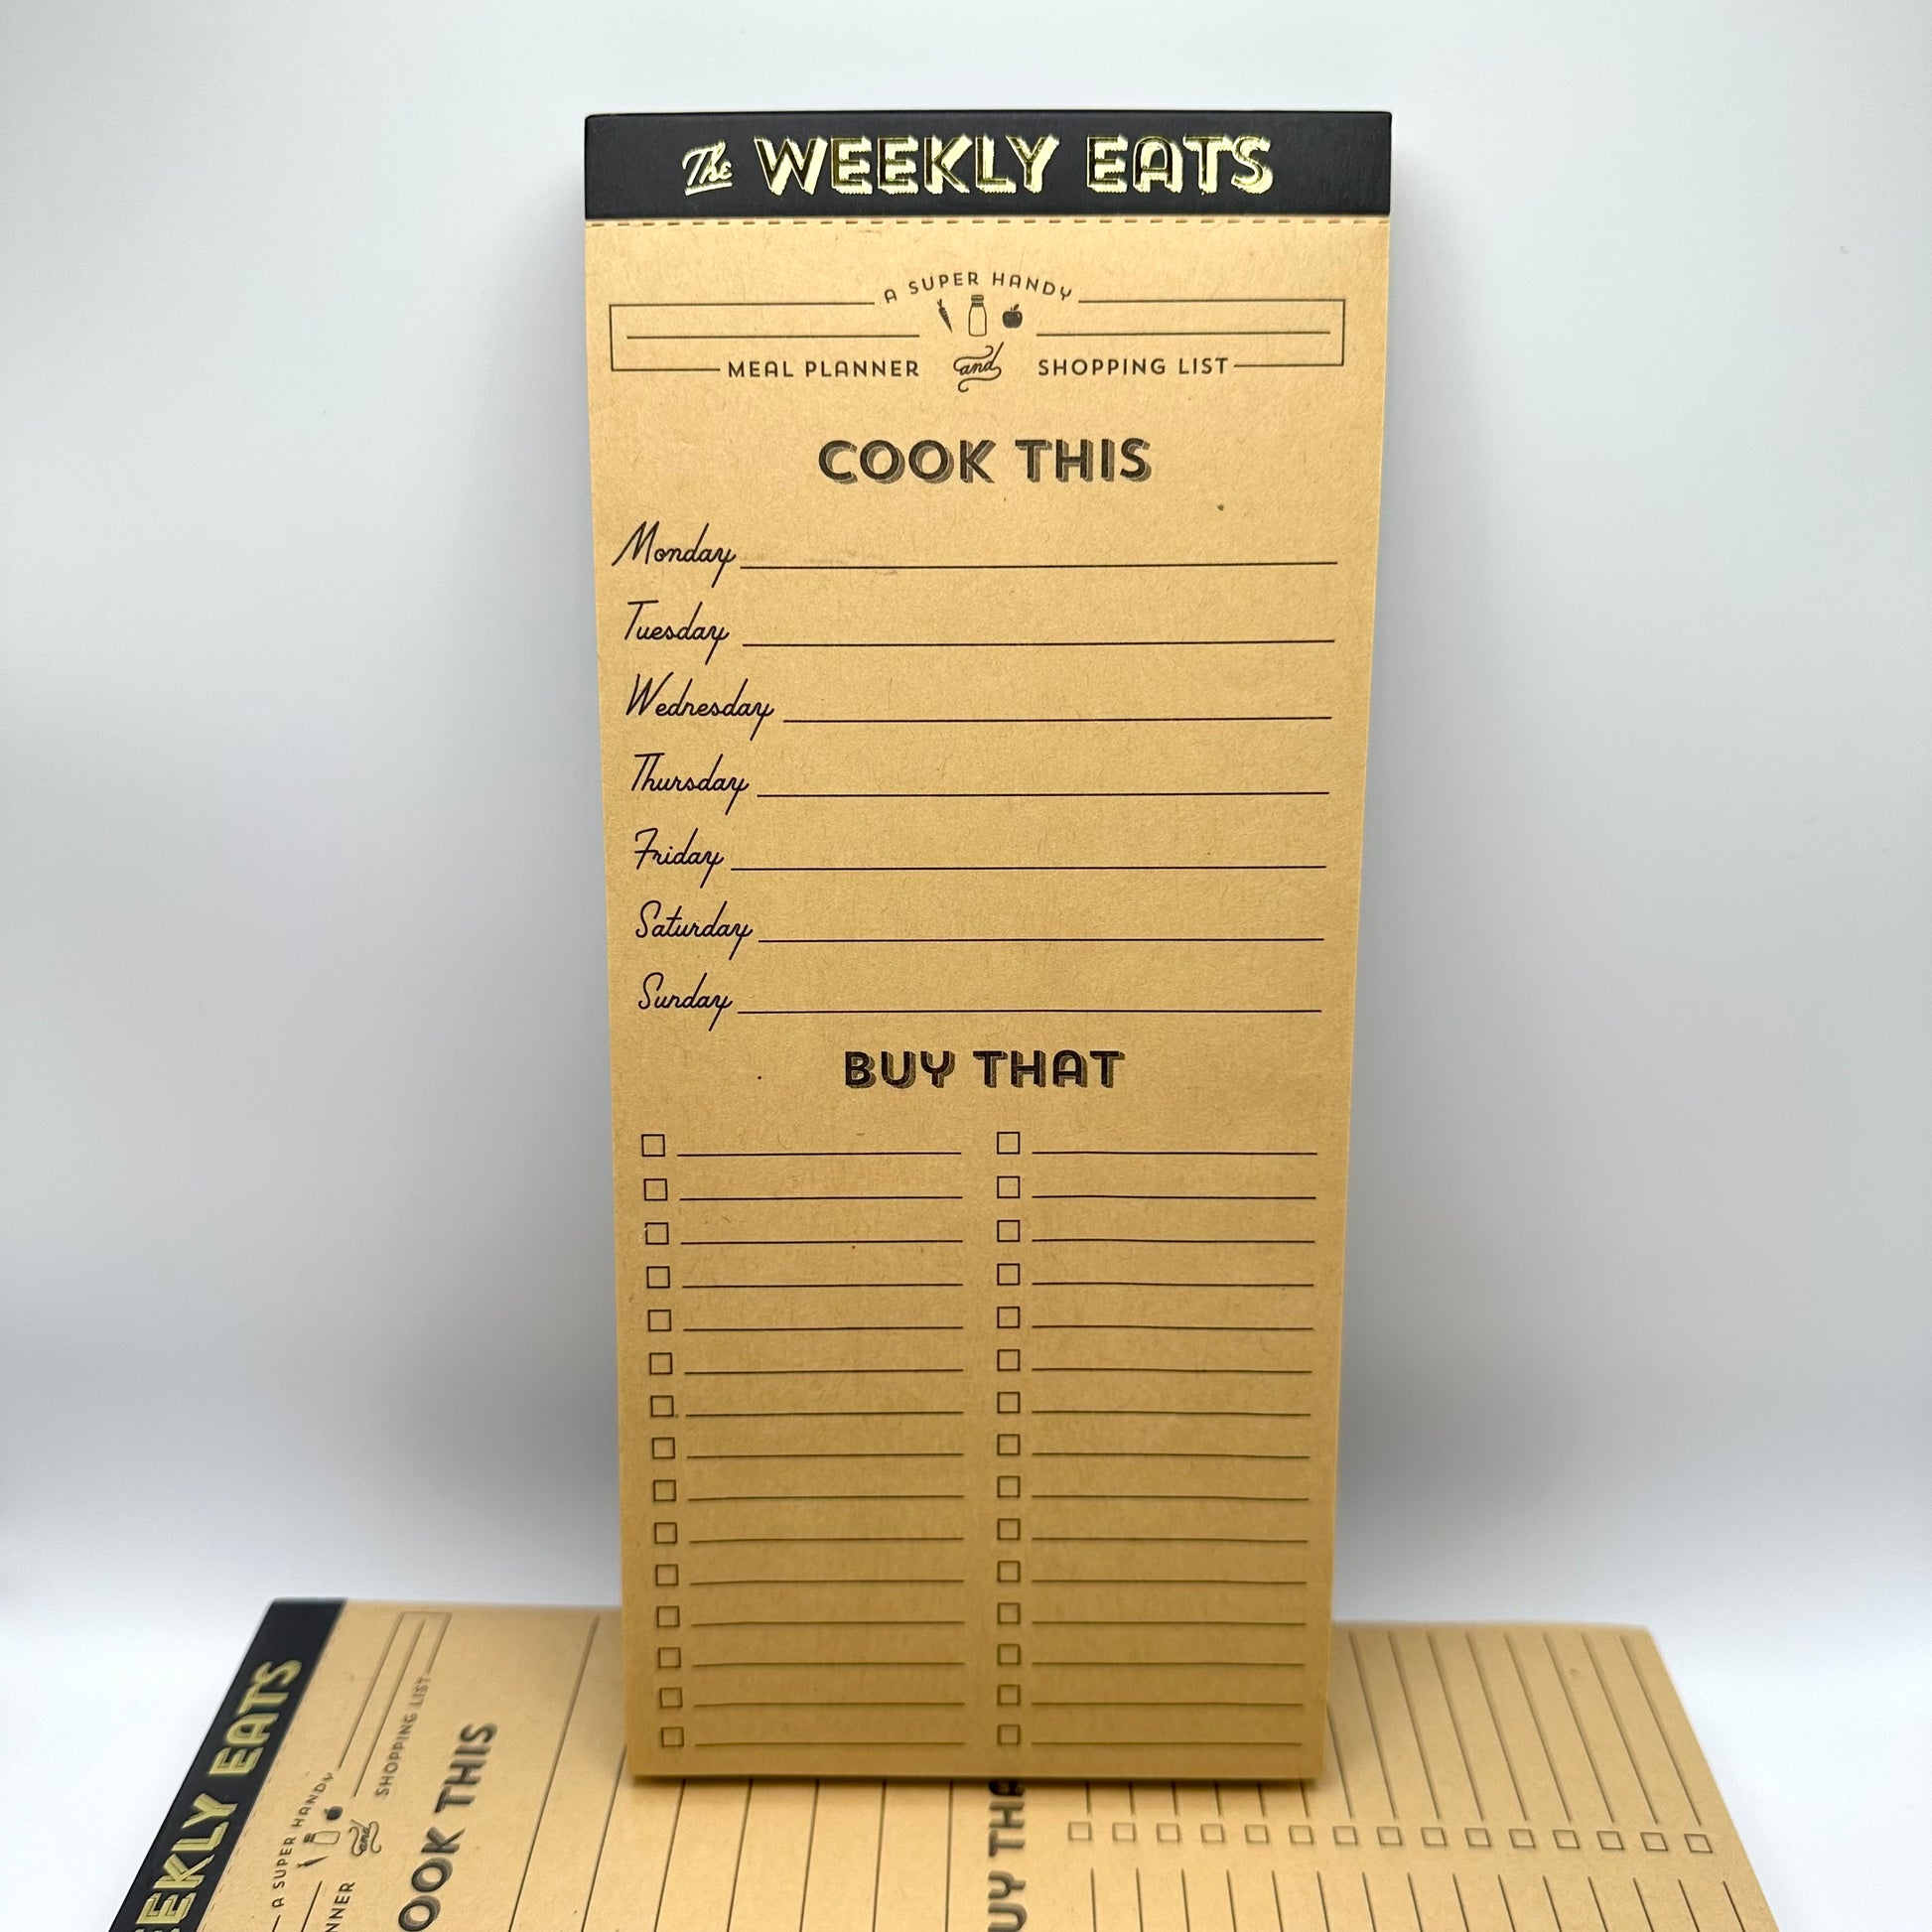 Weekly meal planner notepad. Top portion of the pad has days of the week, bottom portion has a checklist for grocery items to buy.